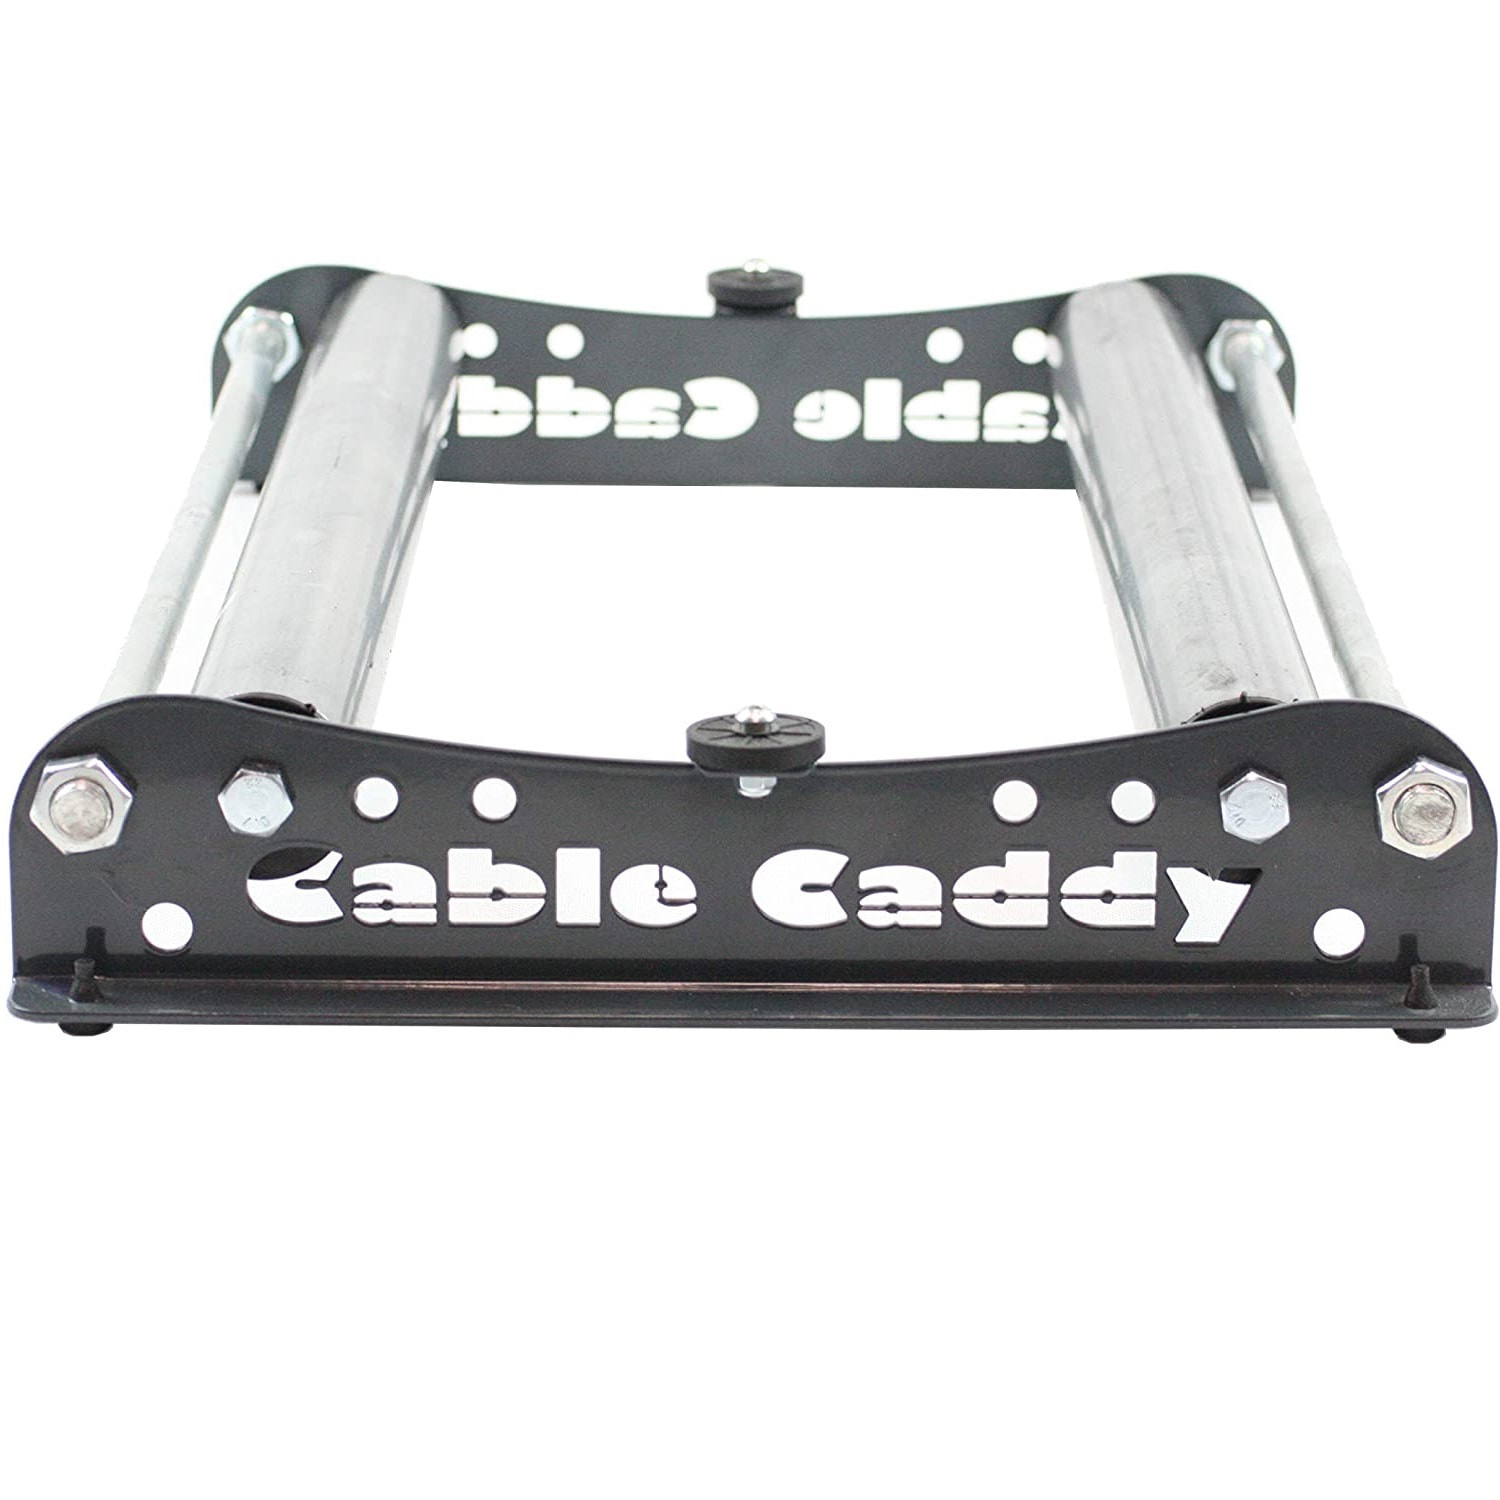 Cable Dispenser Cable Caddy 510 Heavy Duty for Cable Reels up to 20 width  - SILVER (assembled in USA) : Electronics 